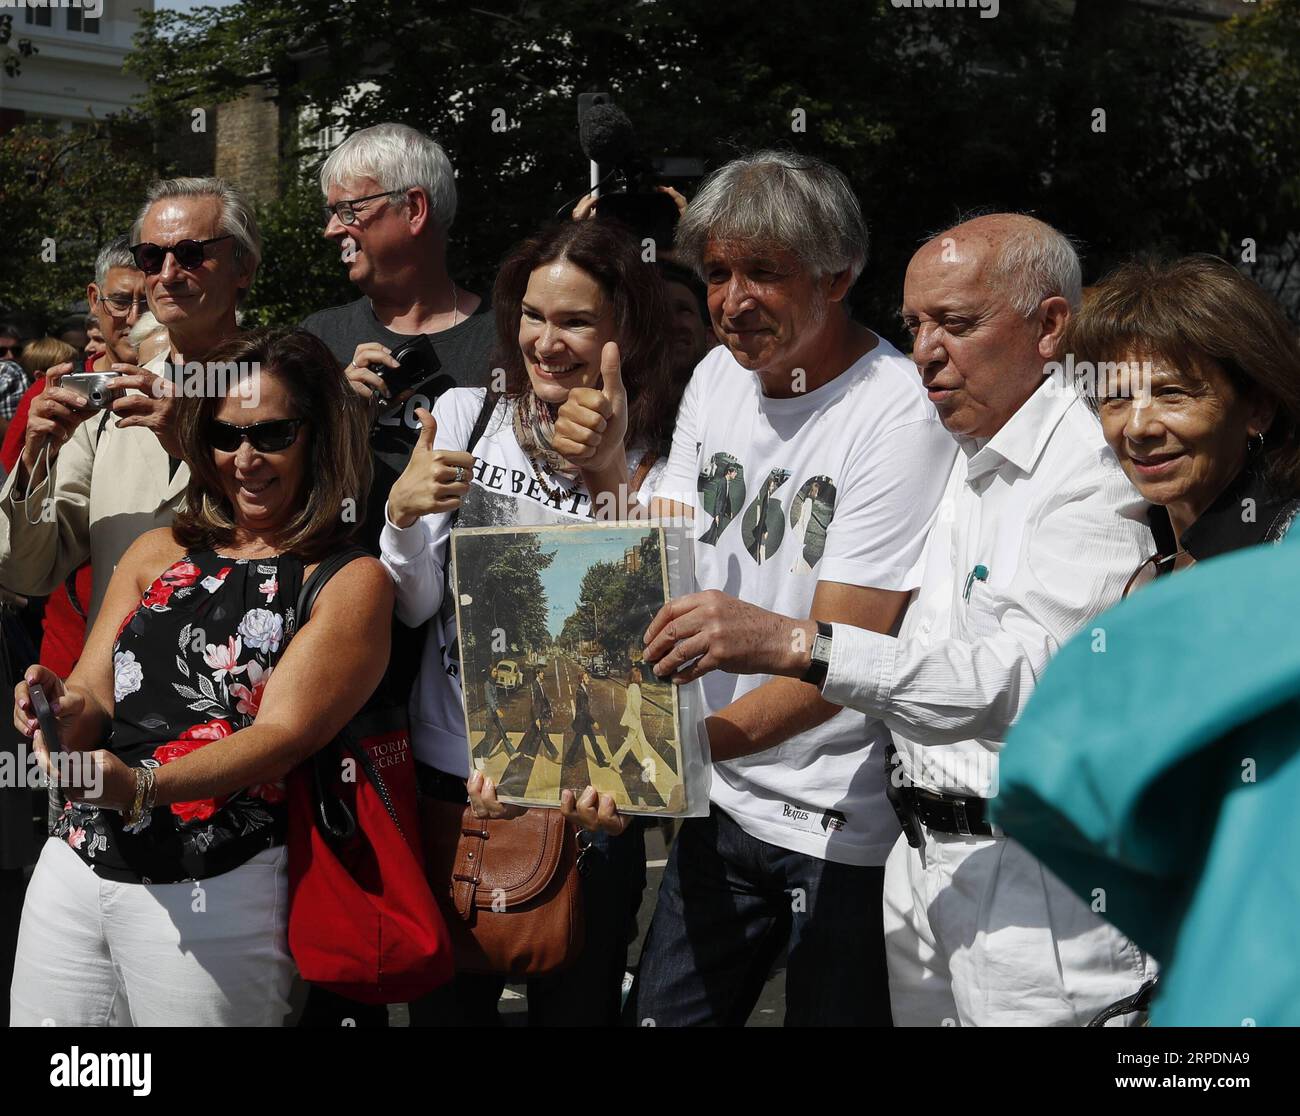 (190808) -- LONDON, Aug. 8, 2019 -- Beatles fans pose for photos with an original copy of the album cover of Abbey Road in London, Britain, Aug. 8, 2019. Exactly 50 years ago, Beatles members John Lennon, Paul McCartney, George Harrison and Ringo Starr walked on the zebra crossing outside their recording studio in north London to get the cover shot for the album Abbey Road . ) BRITAIN-LONDON-BEATLES-ABBEY ROAD-PHOTOGRAPH HanxYan PUBLICATIONxNOTxINxCHN Stock Photo